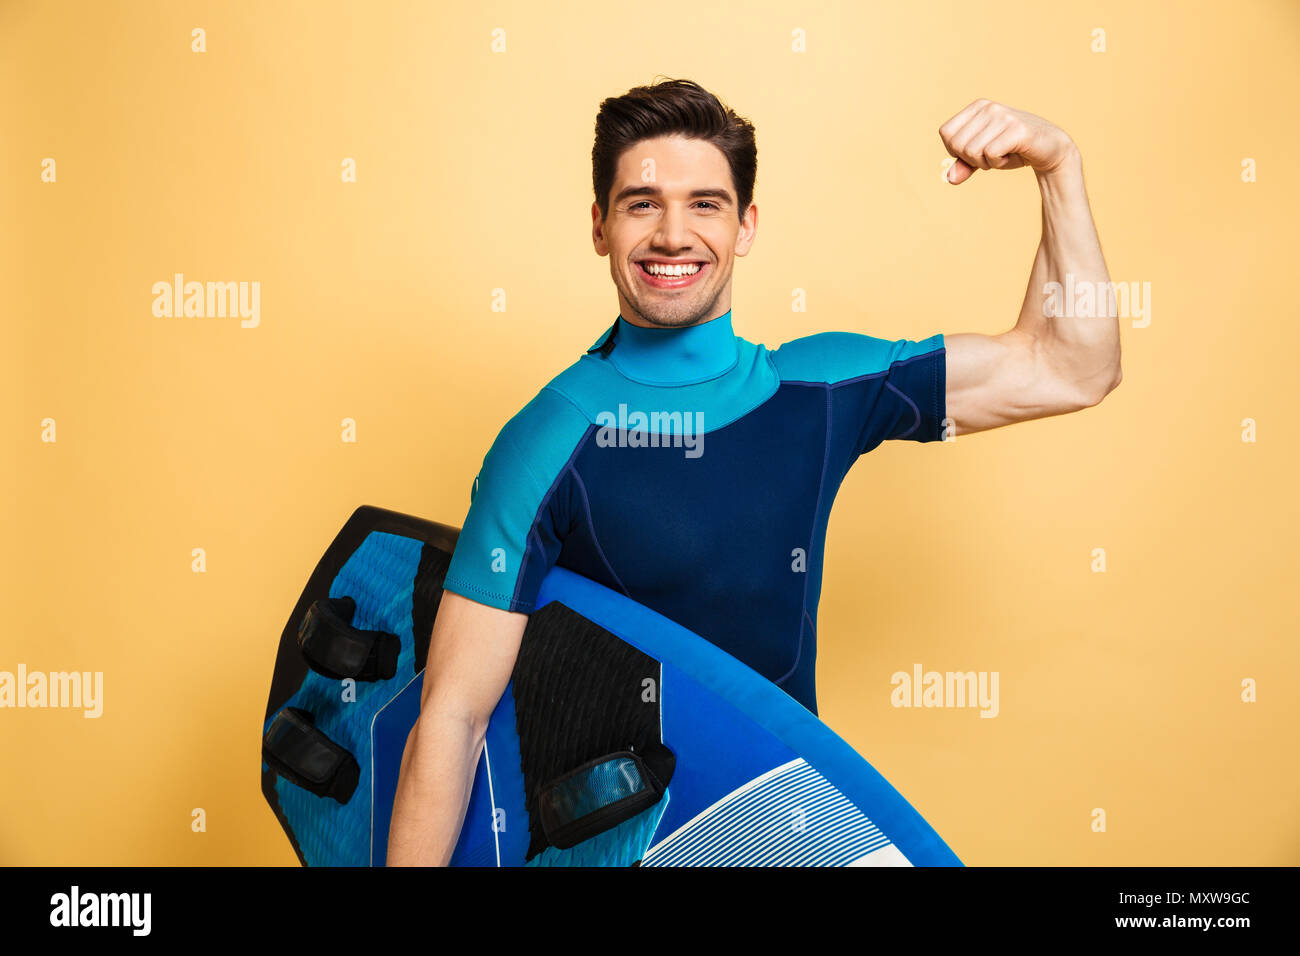 Portrait of a happy young man dressed in swimsuit flexing biceps while holding a surfboard isolated over yellow background Stock Photo